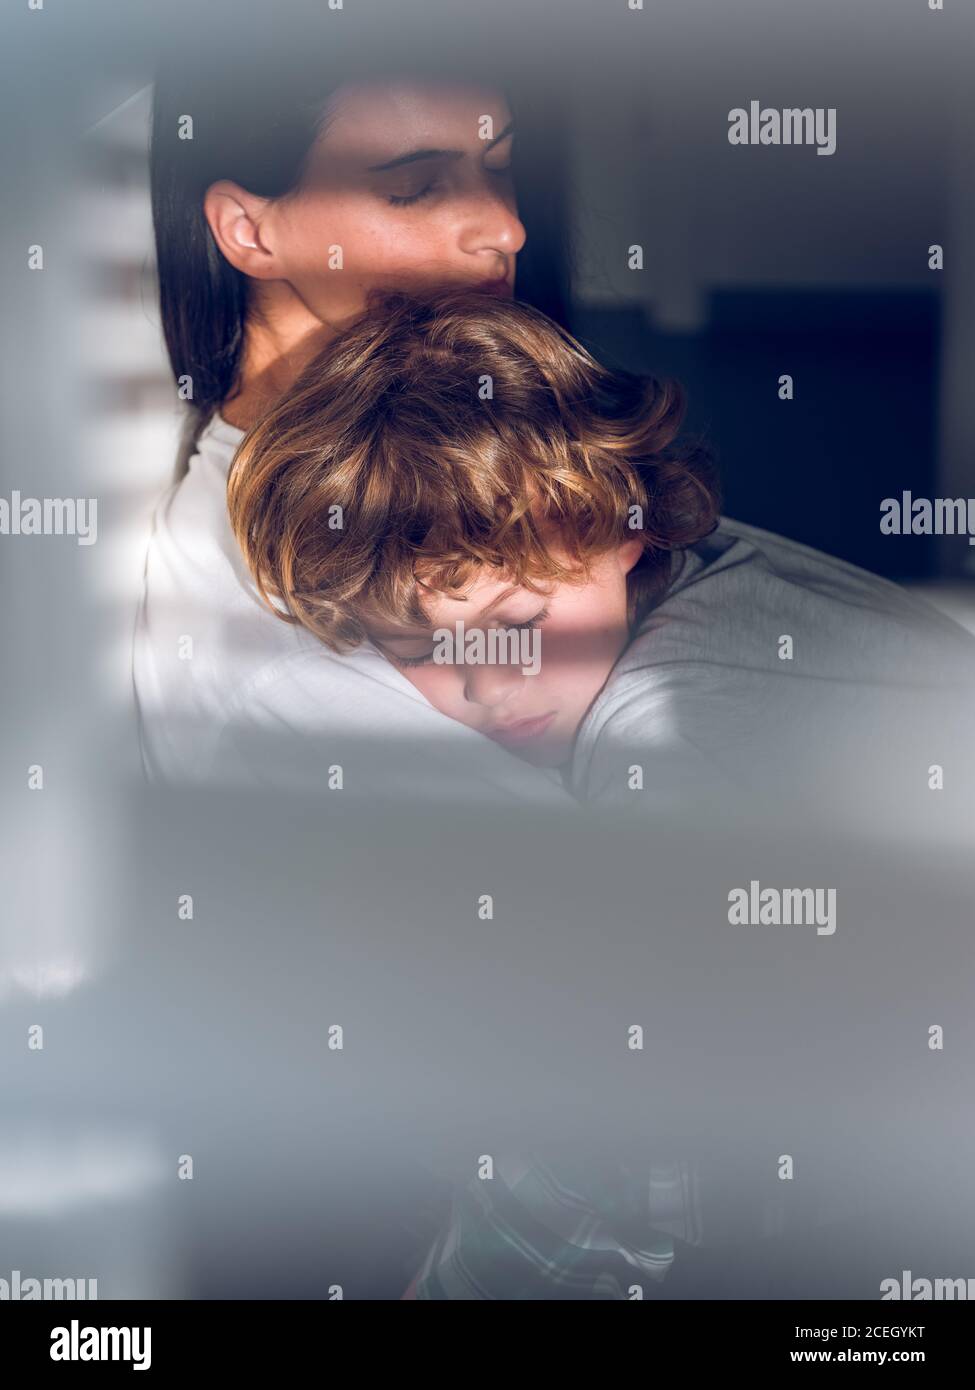 Adorable boy lying on napping Woman and peacefully sleeping while spending time together. Stock Photo